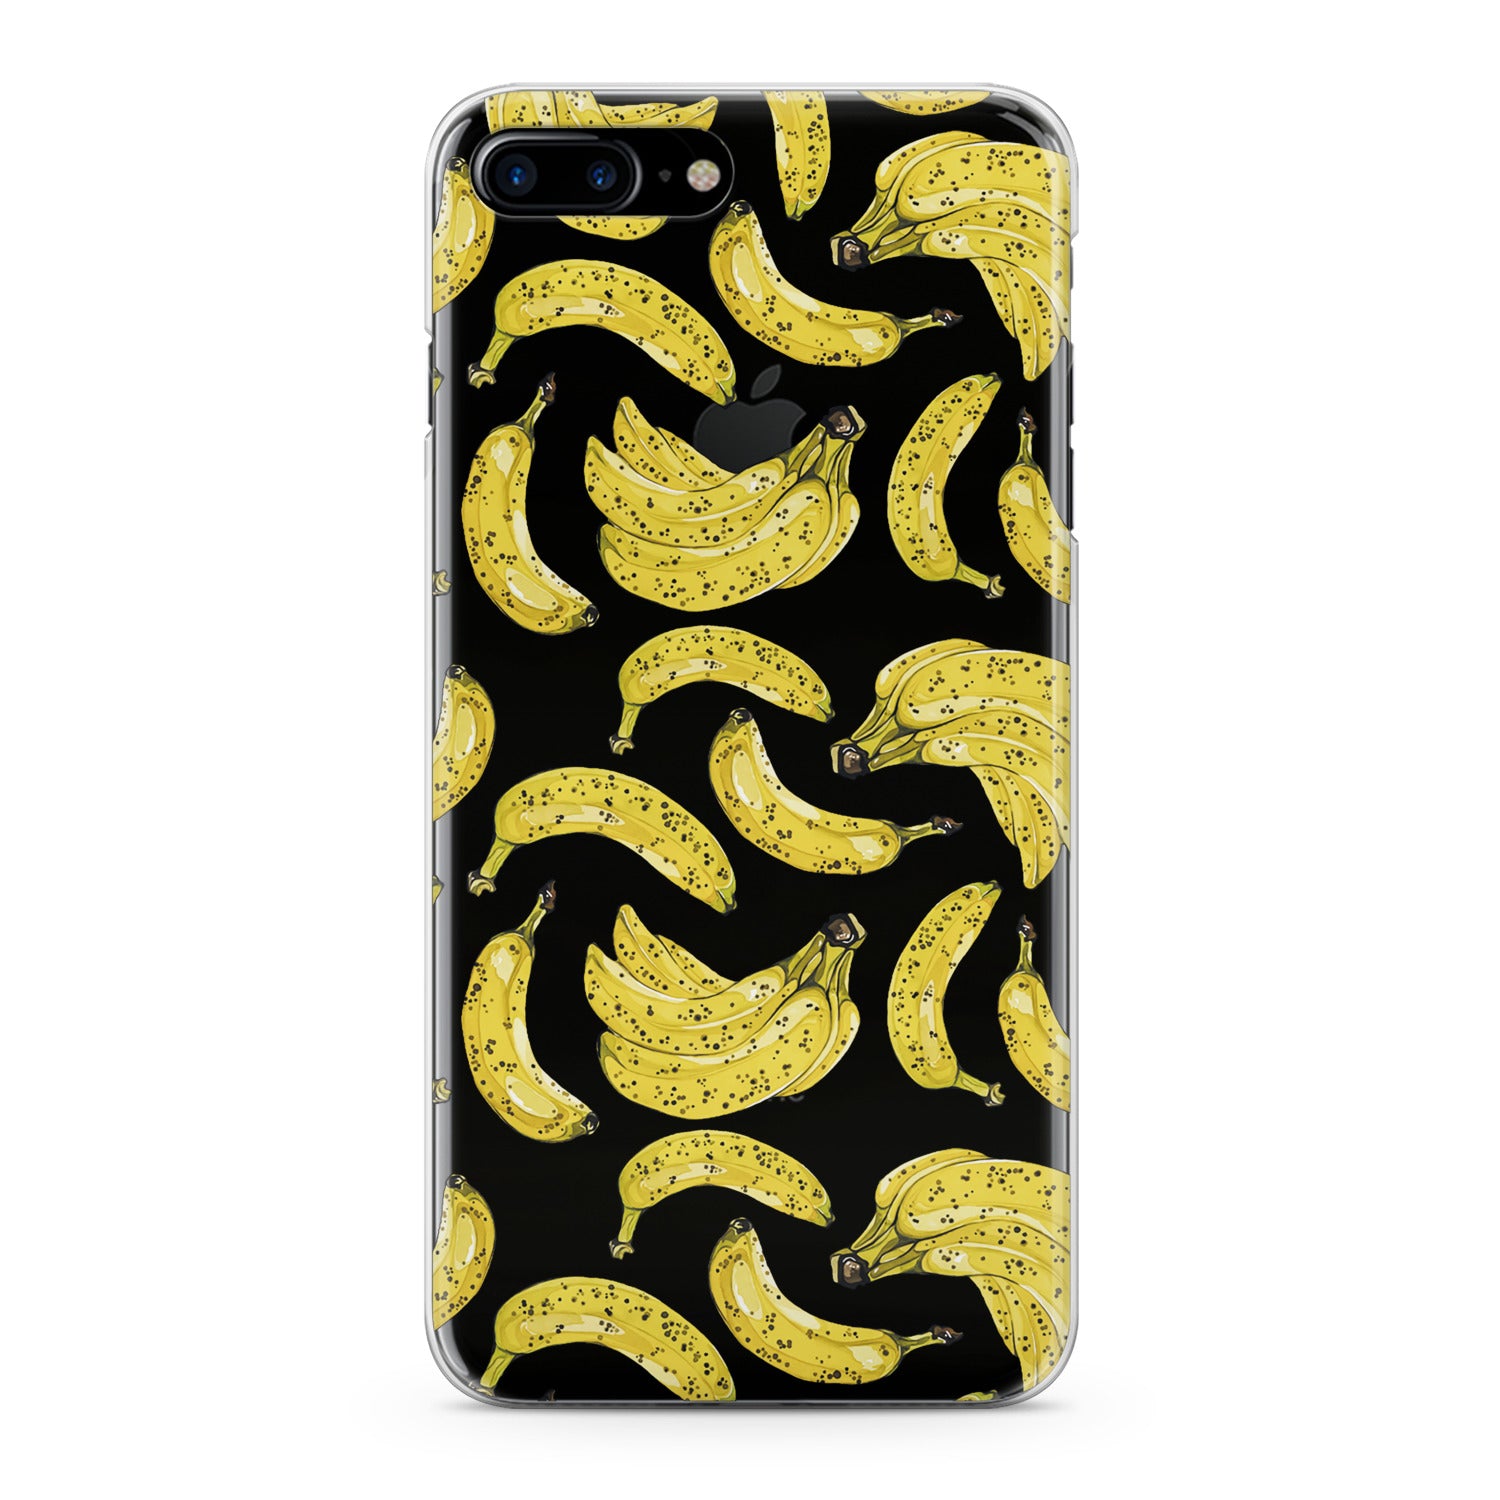 Lex Altern Banana Pattern Phone Case for your iPhone & Android phone.